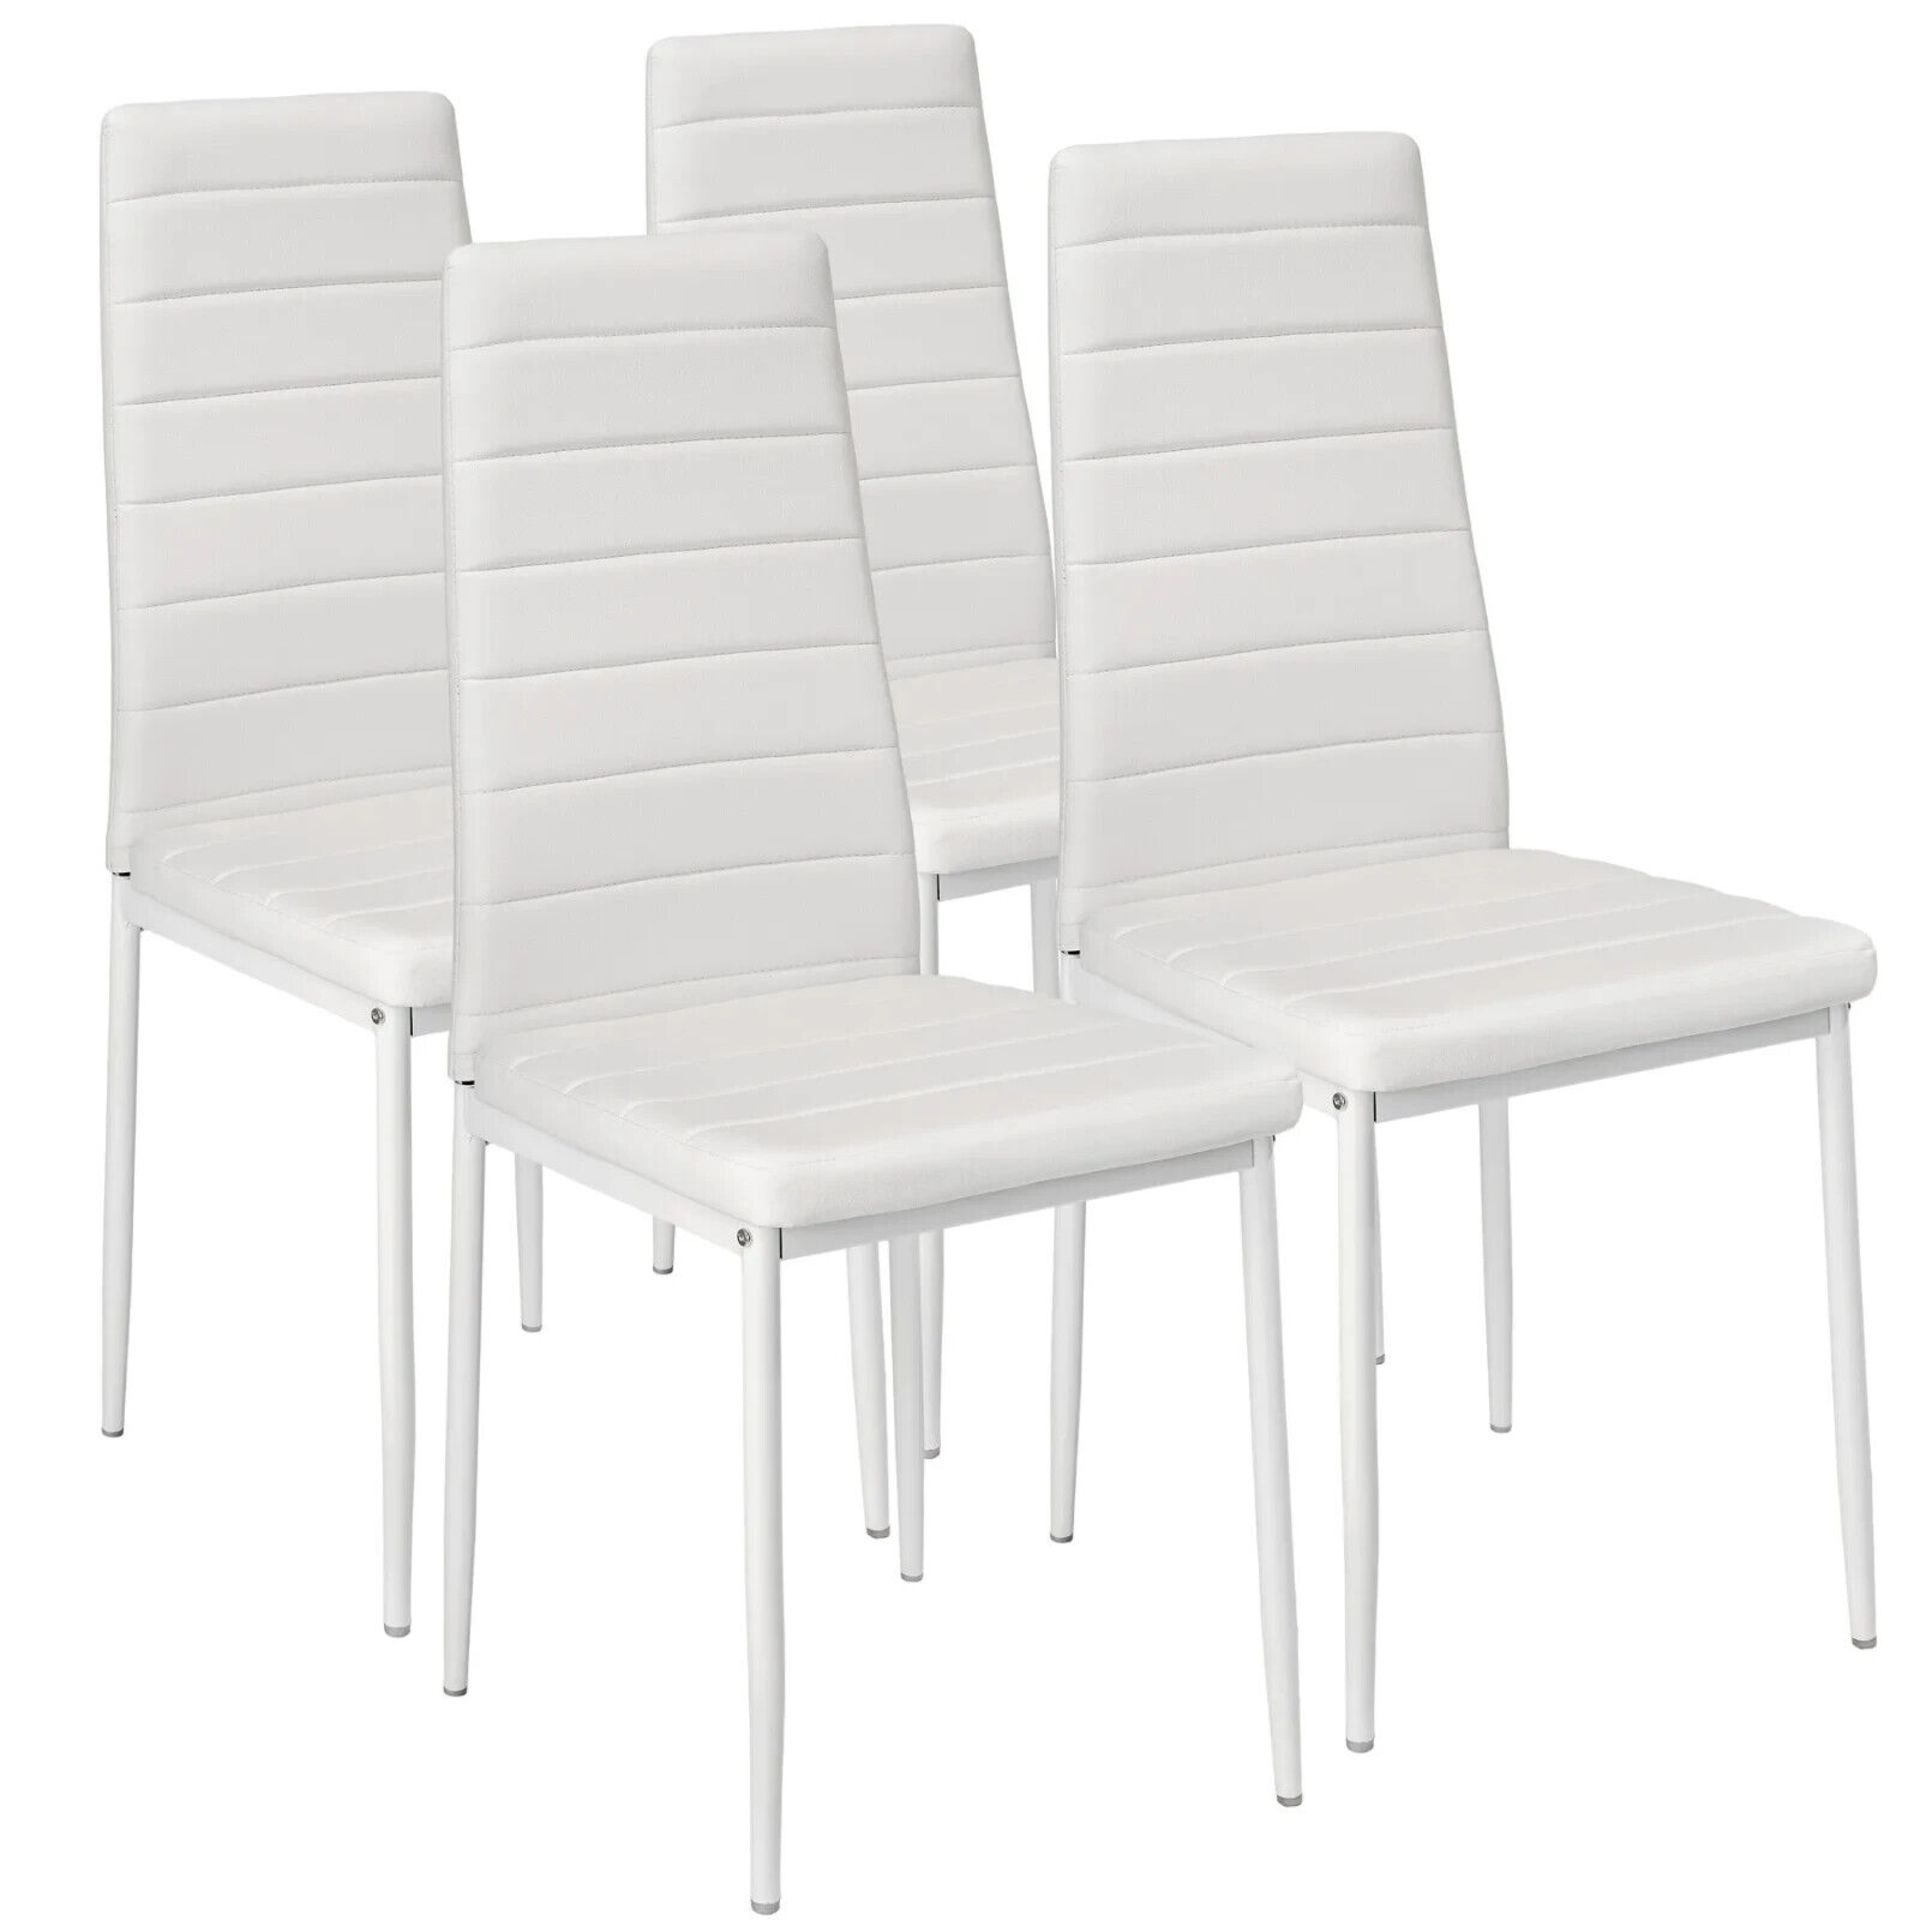 3 SETS OF 4 MODERN WHITE PU LEATHER DINING CHAIRS HIGH WHITE METAL LEGS PADDED SEAT RRP £299.97 - Bild 3 aus 3